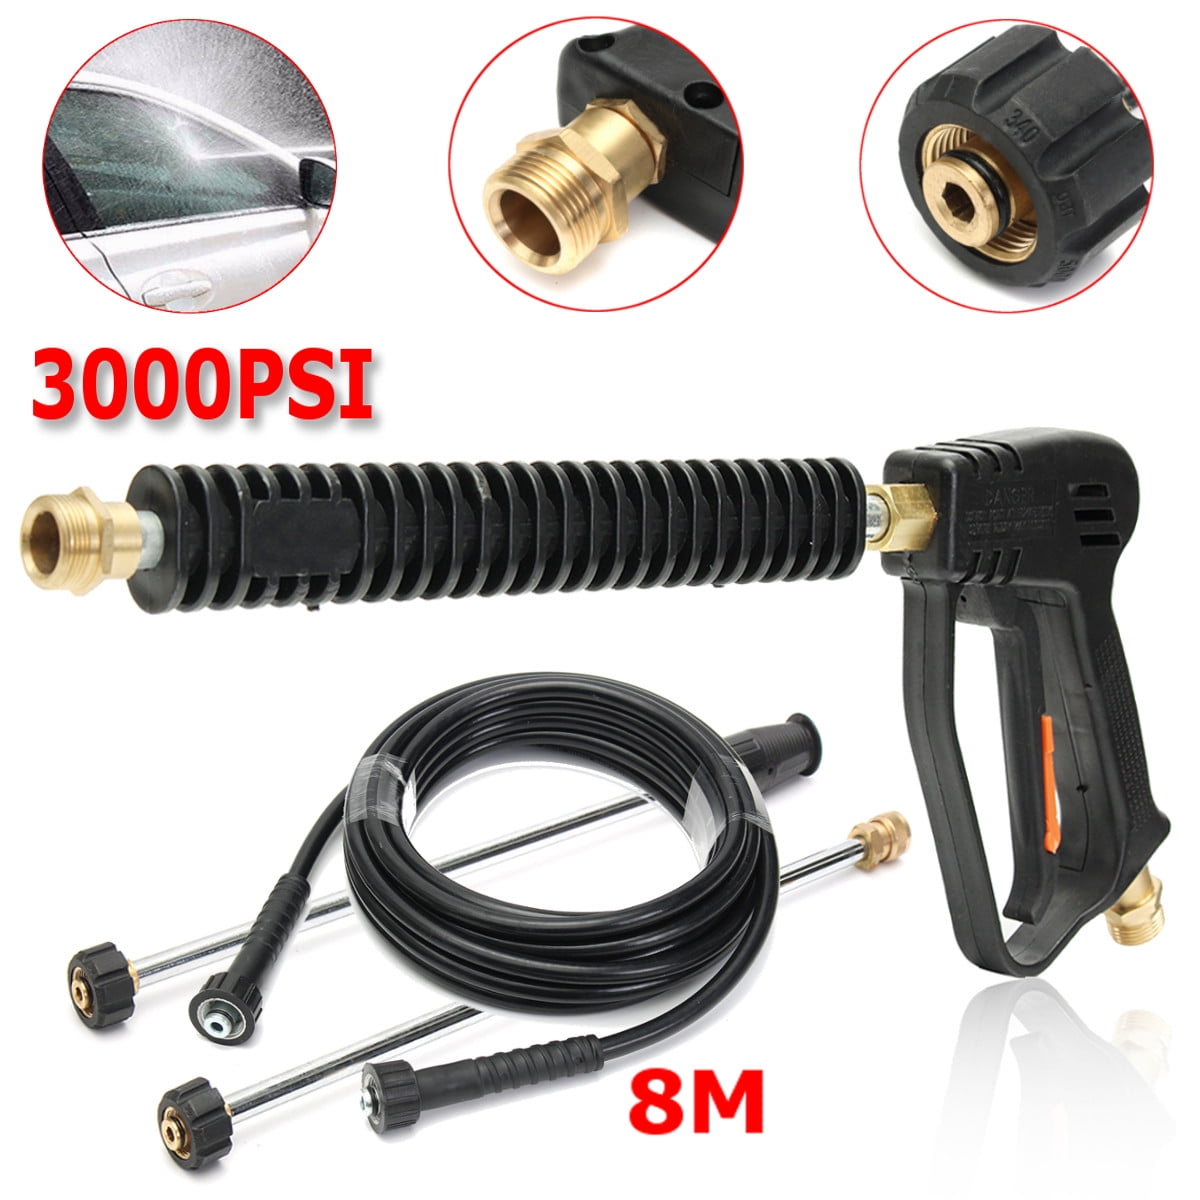 8M Water Washing Hose Replacement For Power High Pressure Washer Car Cleaning US 